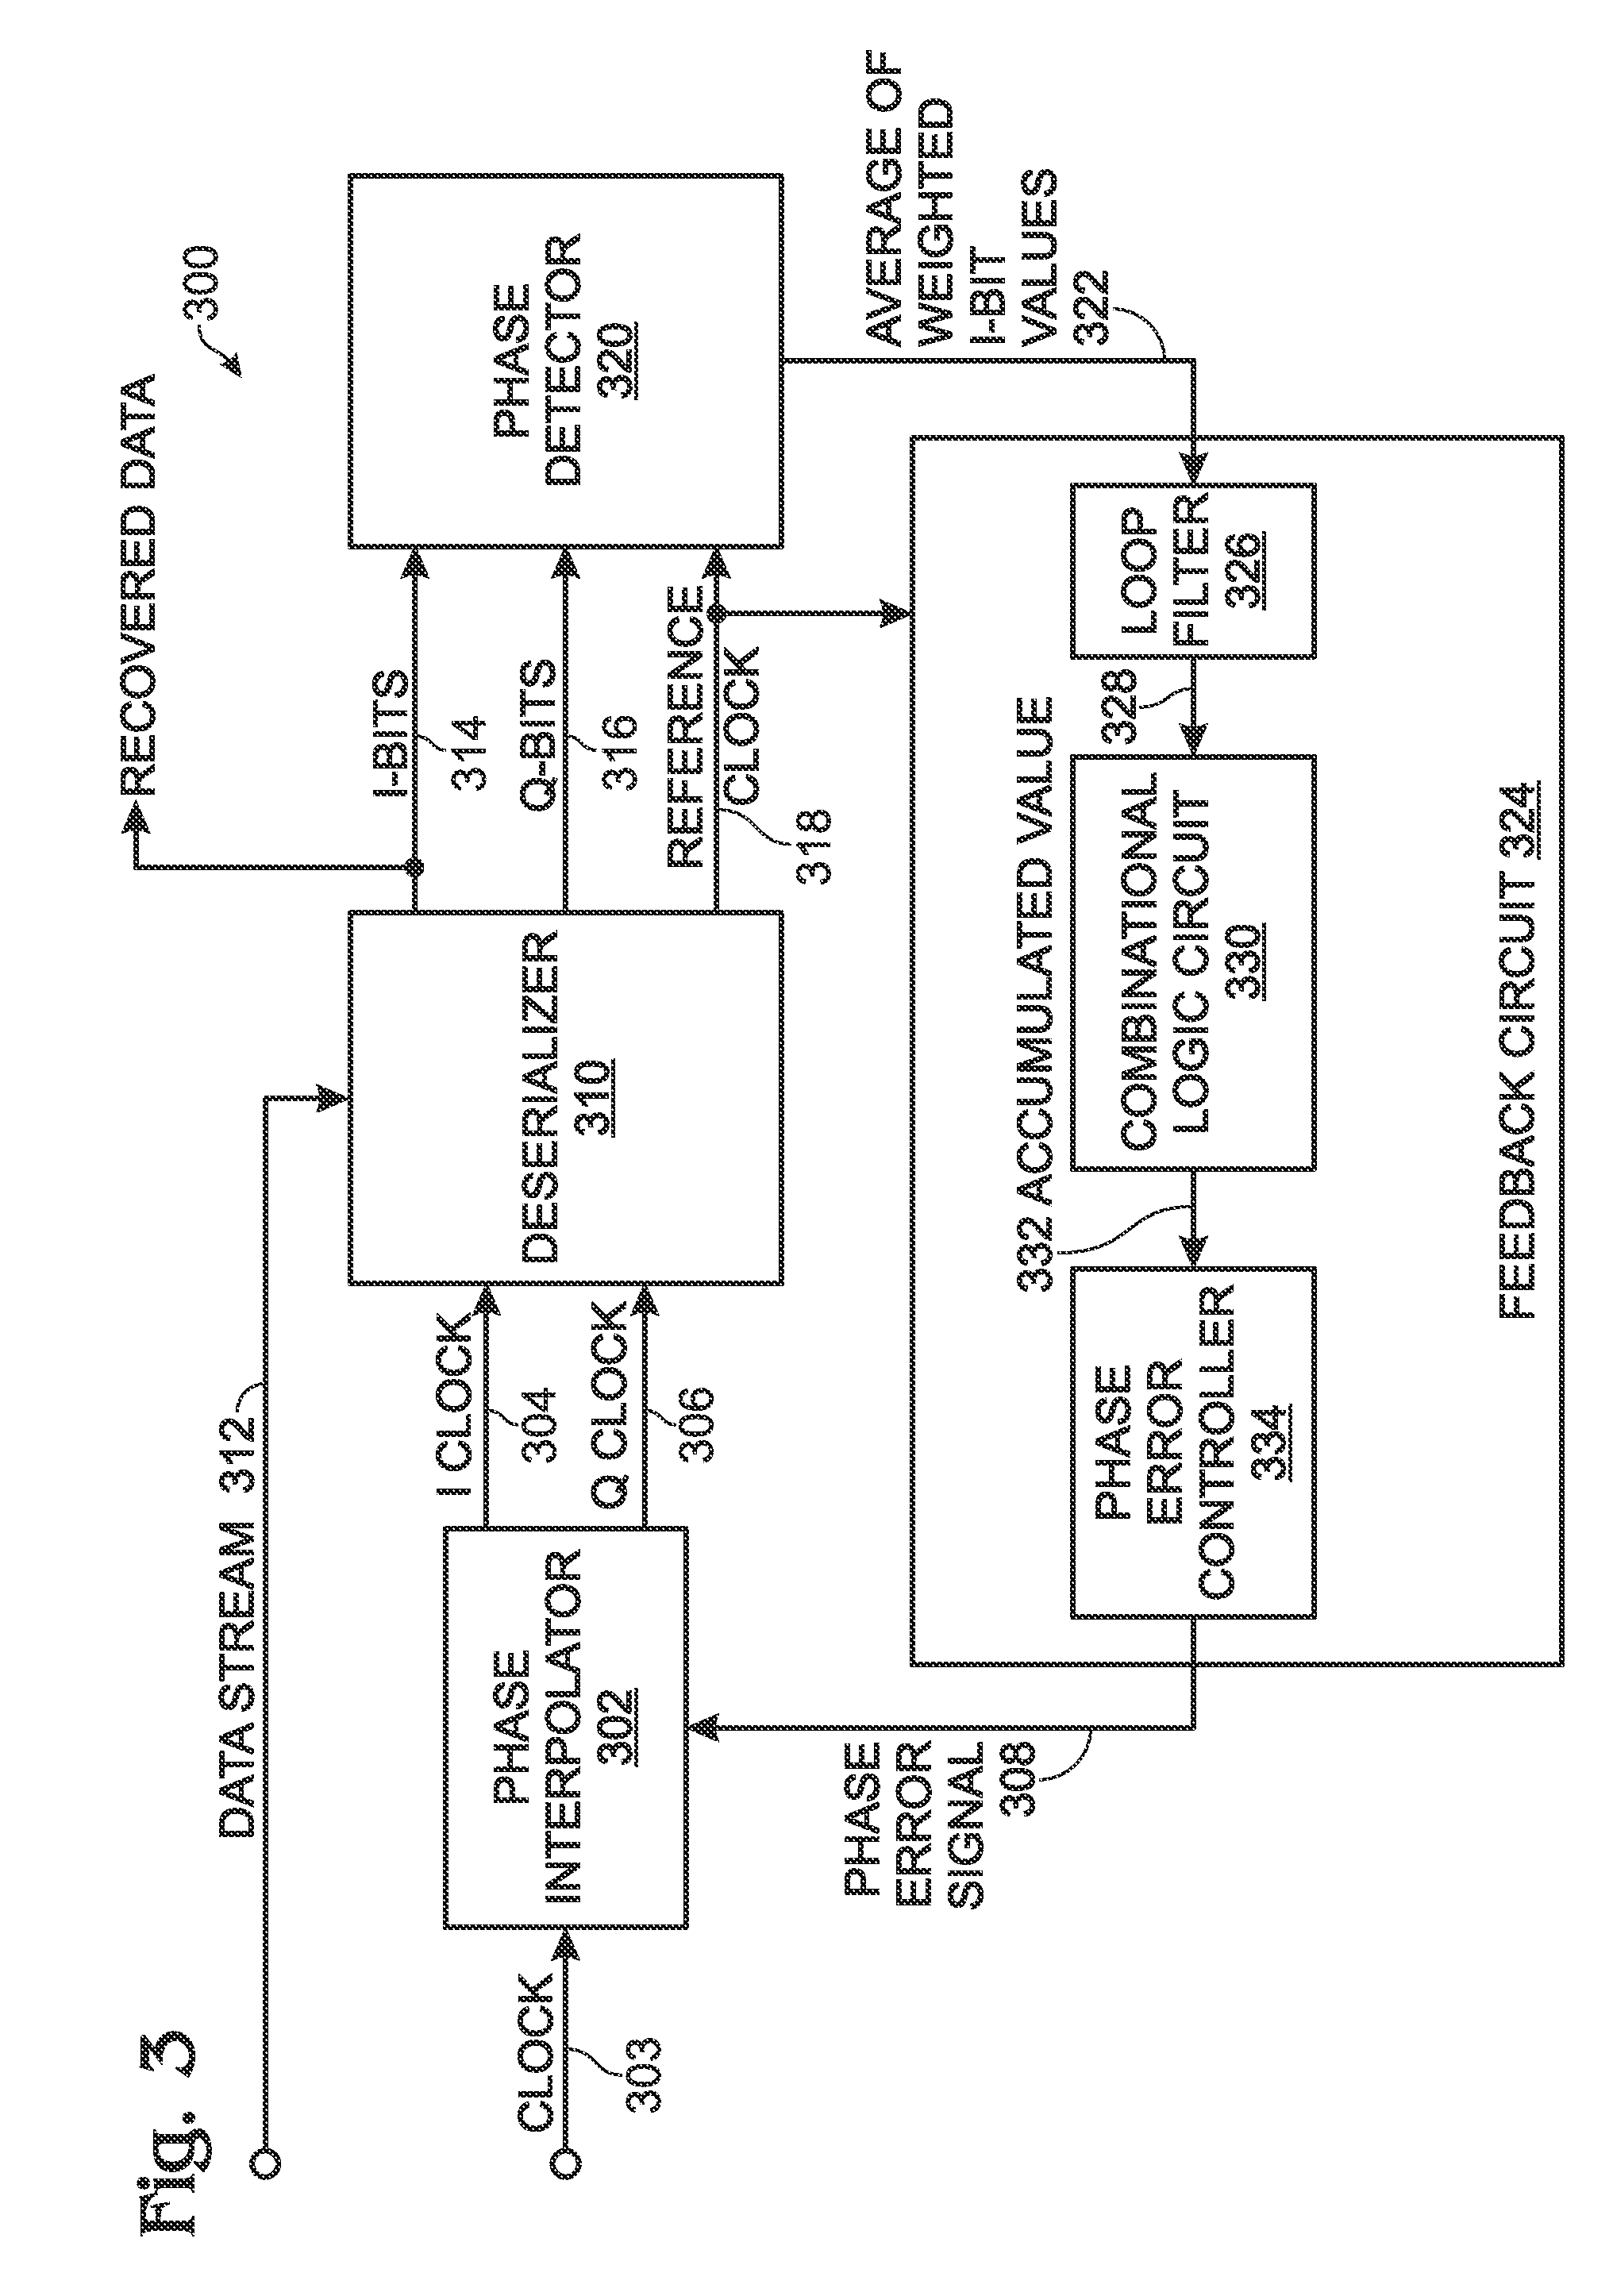 ISI Pattern-Weighted Early-Late Phase Detector with Jitter Correction